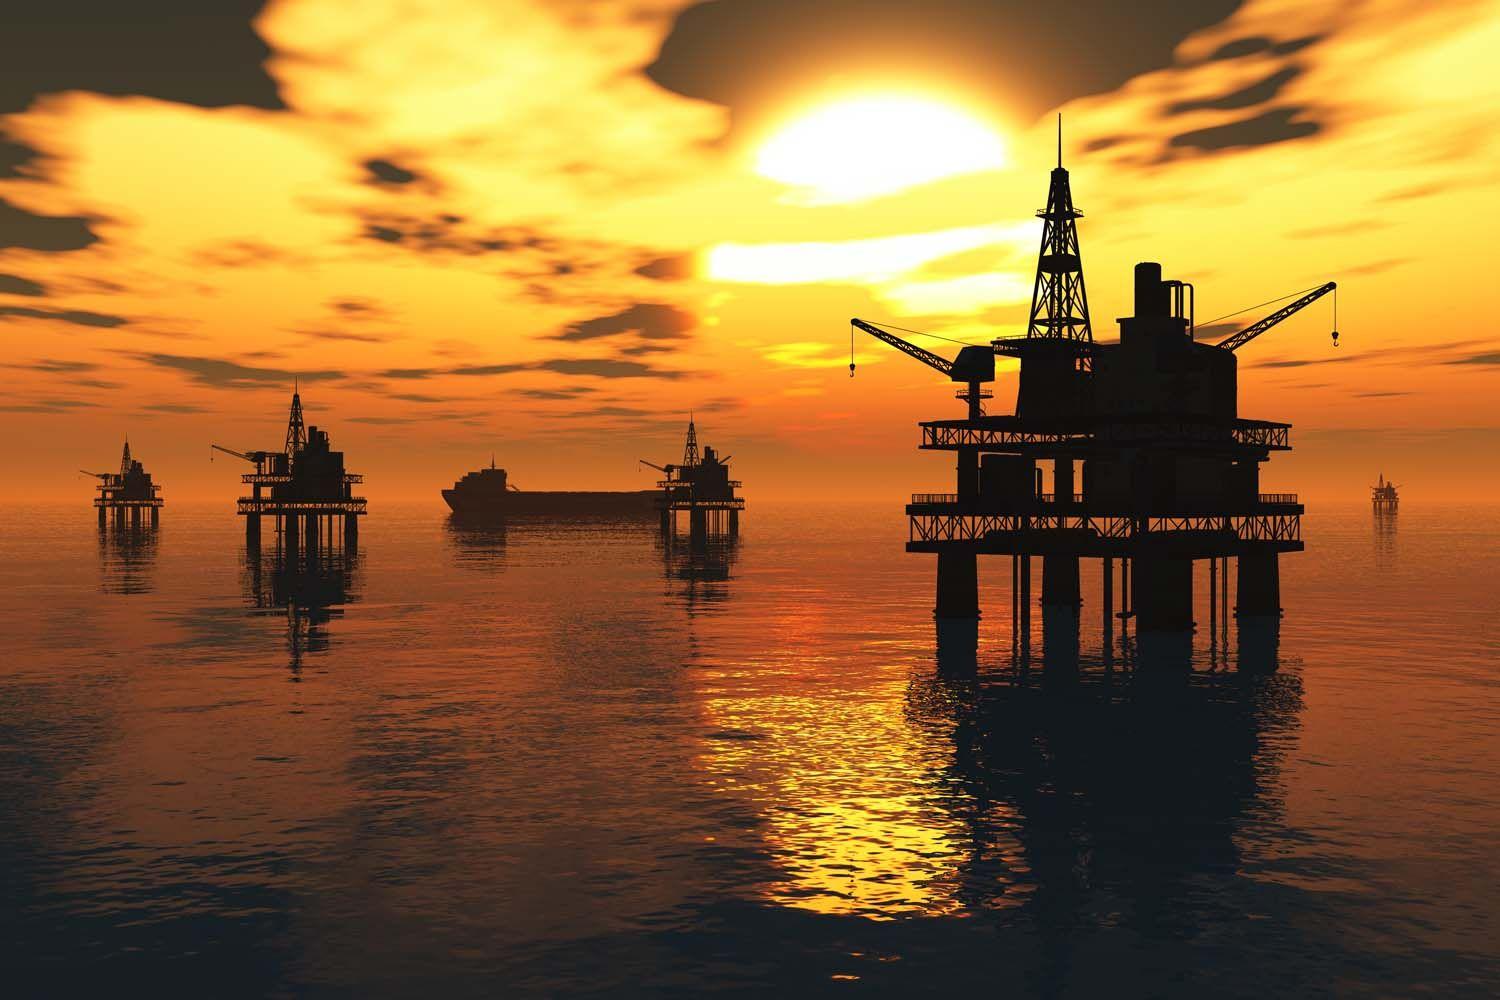 Innovation is the name of the Oil and Gas game